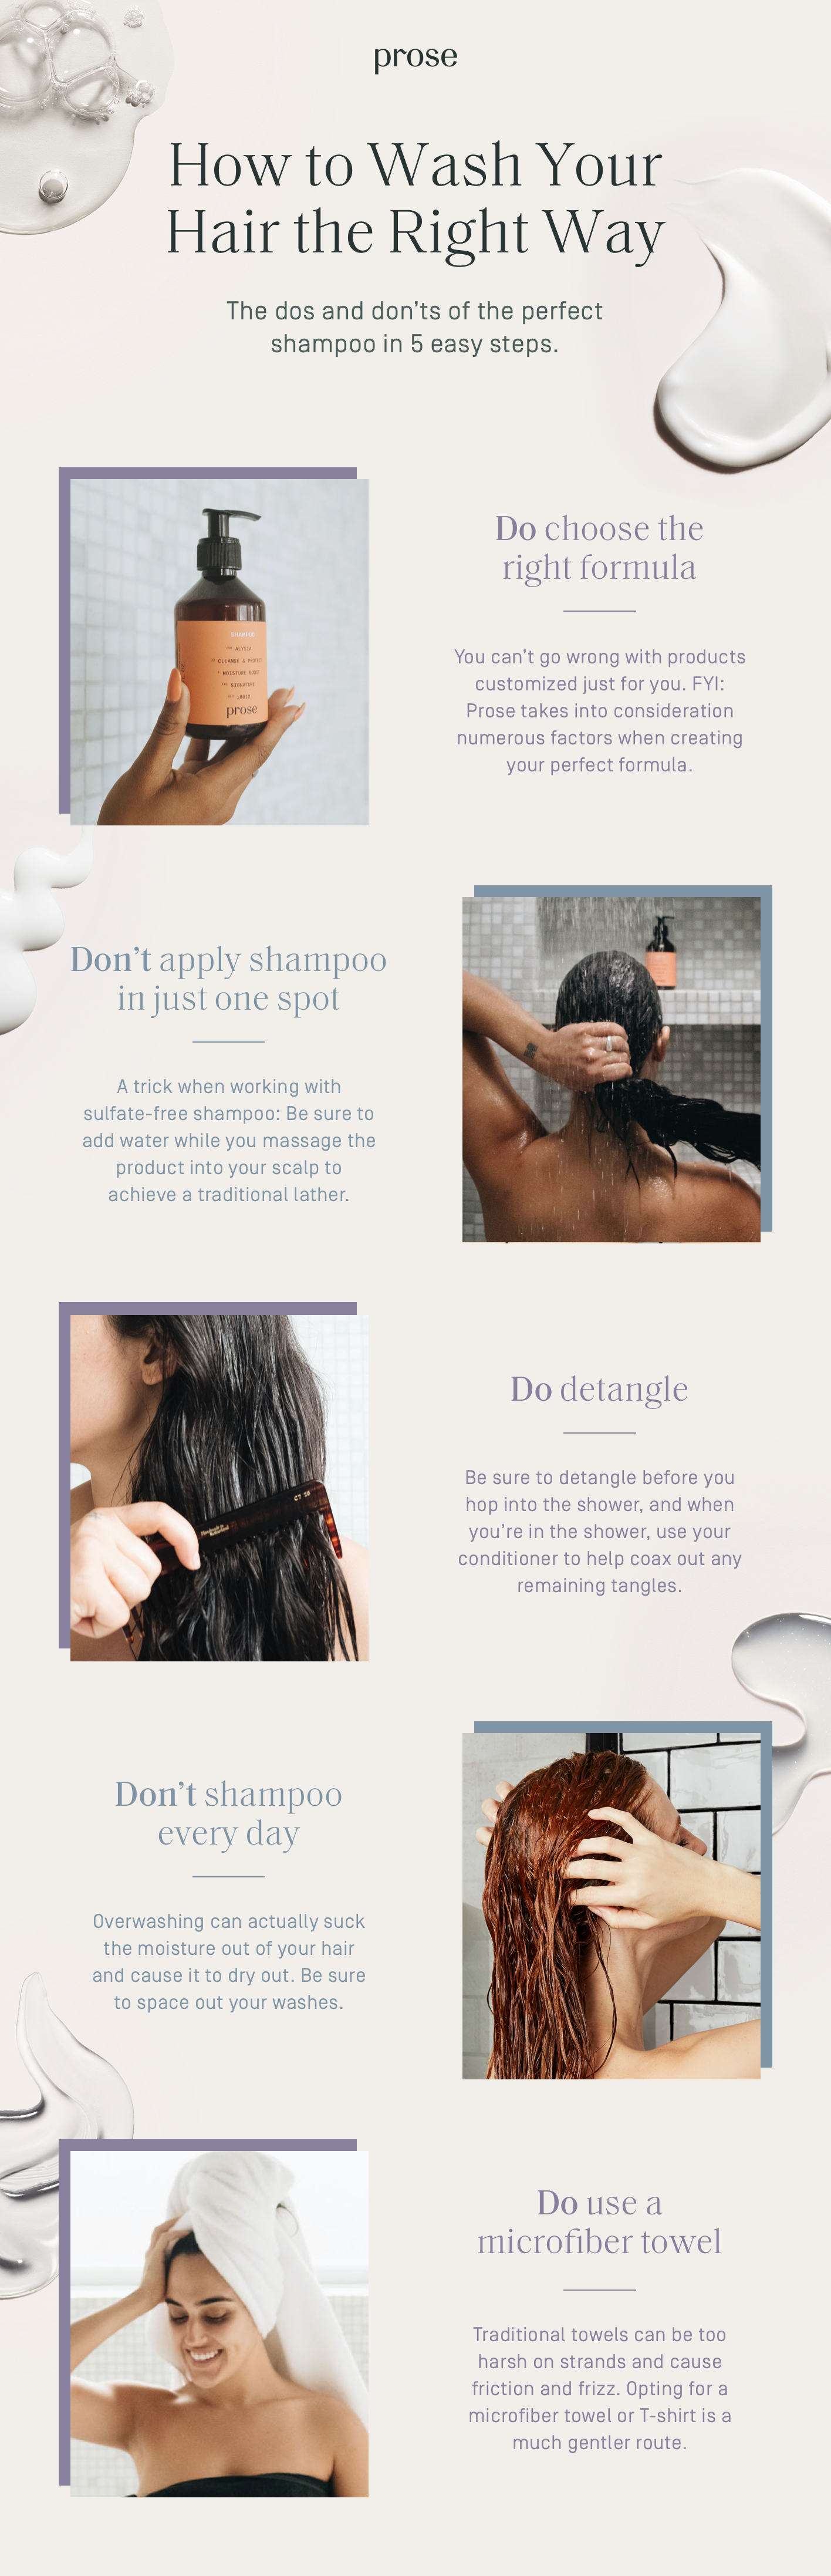 how to wash your hair the right way infographic